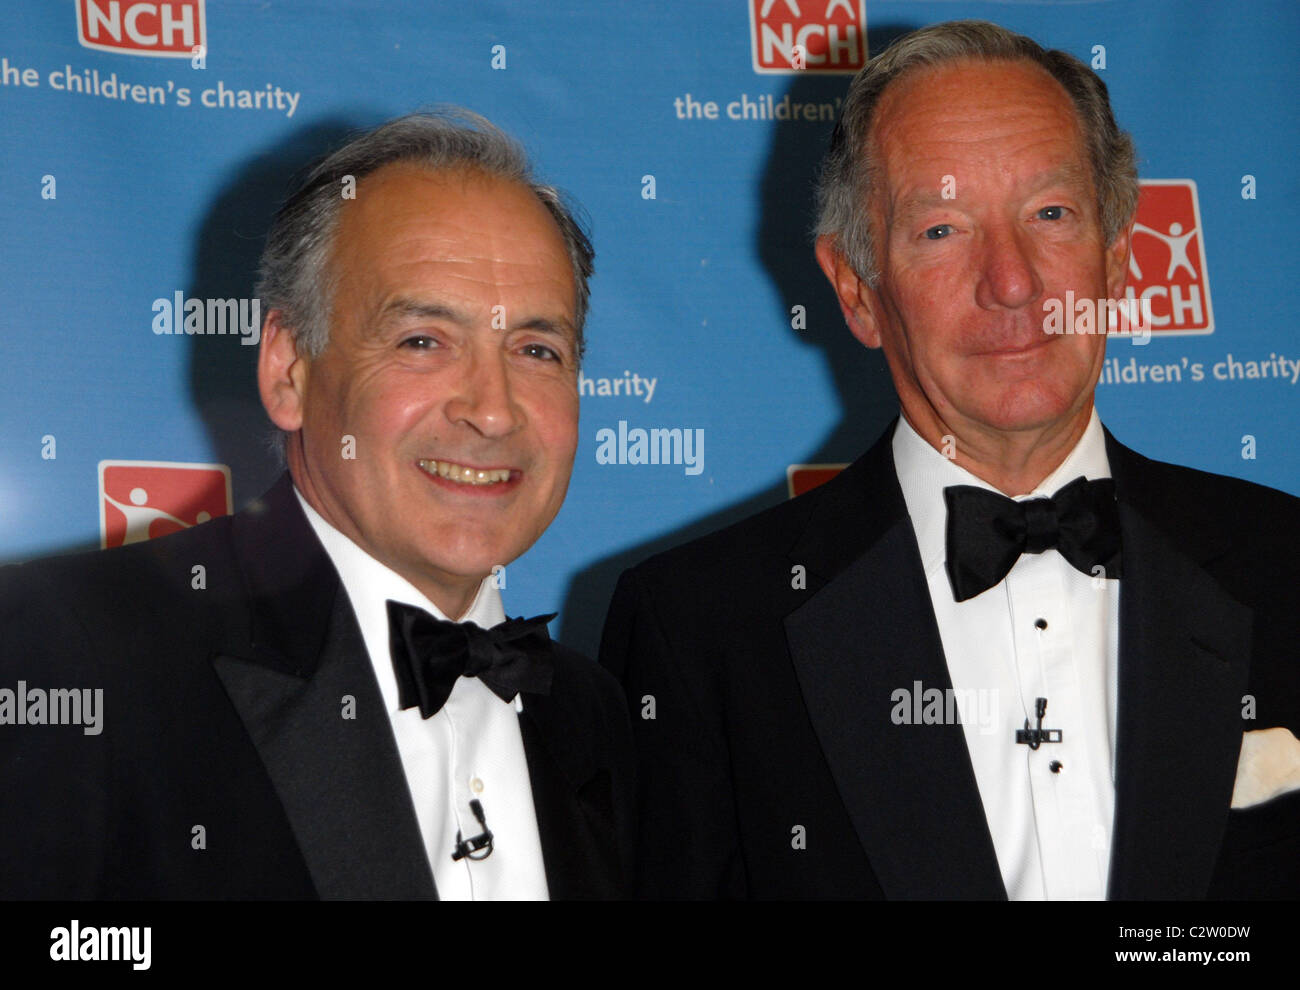 Alastair Stewart and Michael Buerk The NCH Summer Ball at the Dorchester London, England - 13.06.08 Vince Maher/ Stock Photo